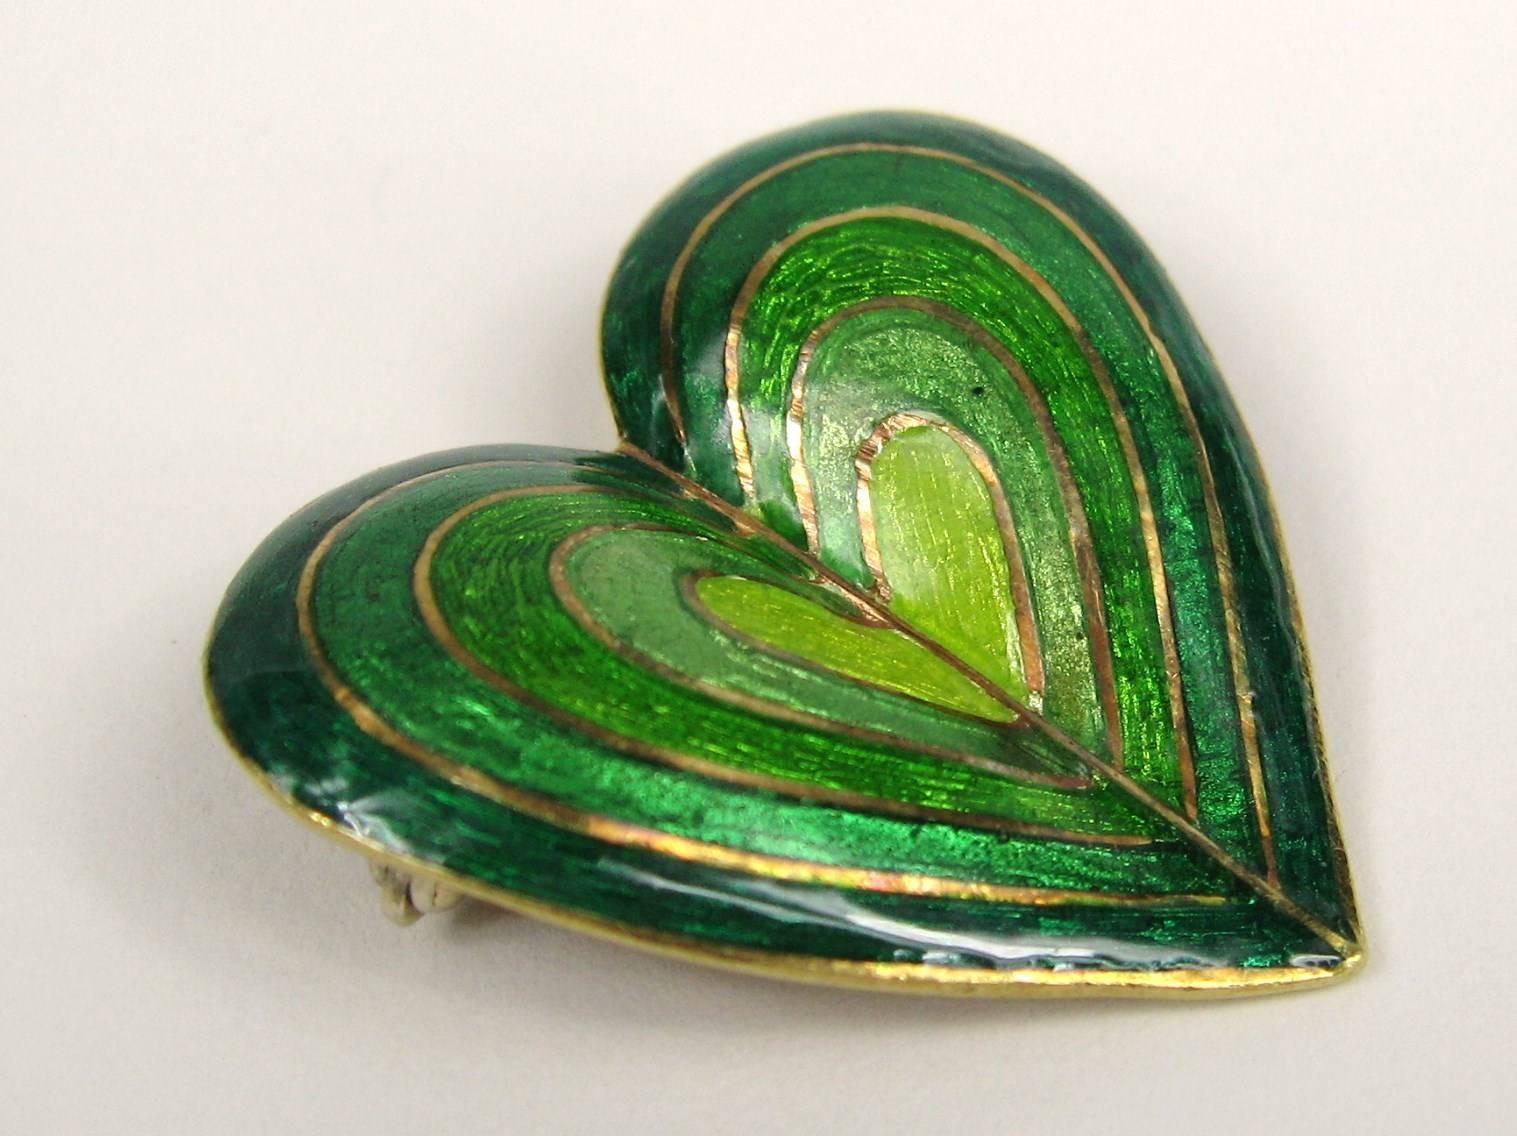 Stunning Green enameled Tiffany Heart Brooch / Pendant -18K Gold, Ombre affect darker green slowly turns into light Green. Measures 1.17 in. top to bottom x 1.23 in. wide. Hallmarked  18k Italy -Tiffany. Be sure to check our storefront for more